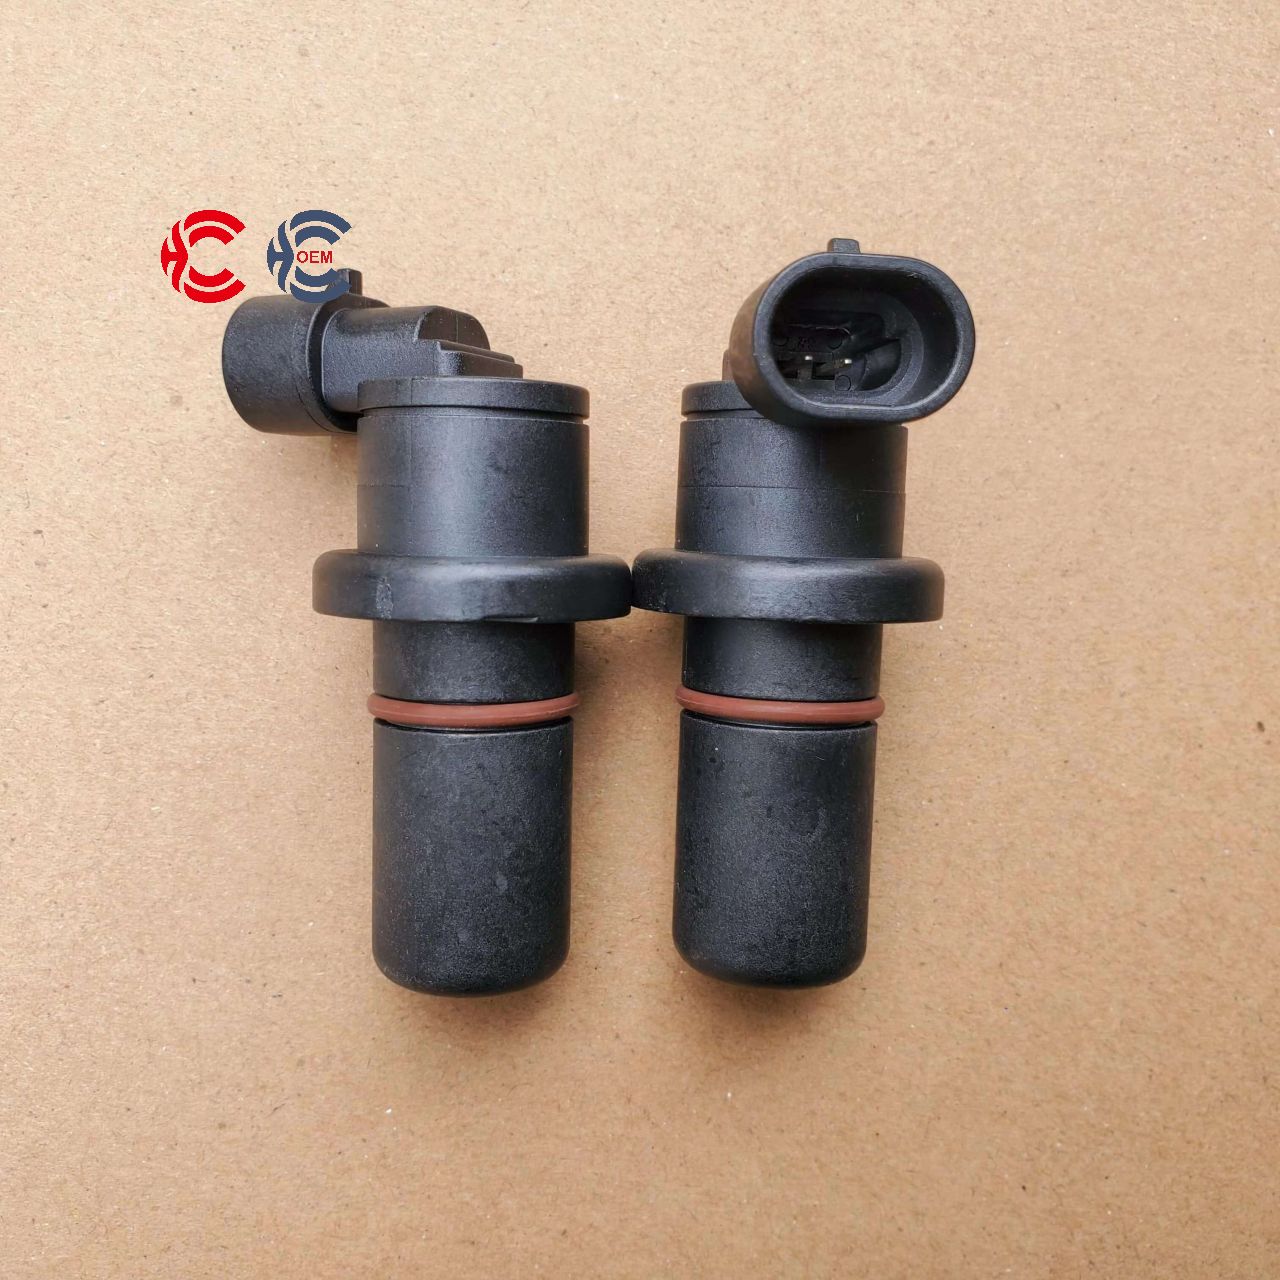 OEM: 4307349 CUMMINSMaterial: ABS MetalColor: Black SilverOrigin: Made in ChinaWeight: 50gPacking List: 1* Crankshaft Position Sensor More ServiceWe can provide OEM Manufacturing serviceWe can Be your one-step solution for Auto PartsWe can provide technical scheme for you Feel Free to Contact Us, We will get back to you as soon as possible.